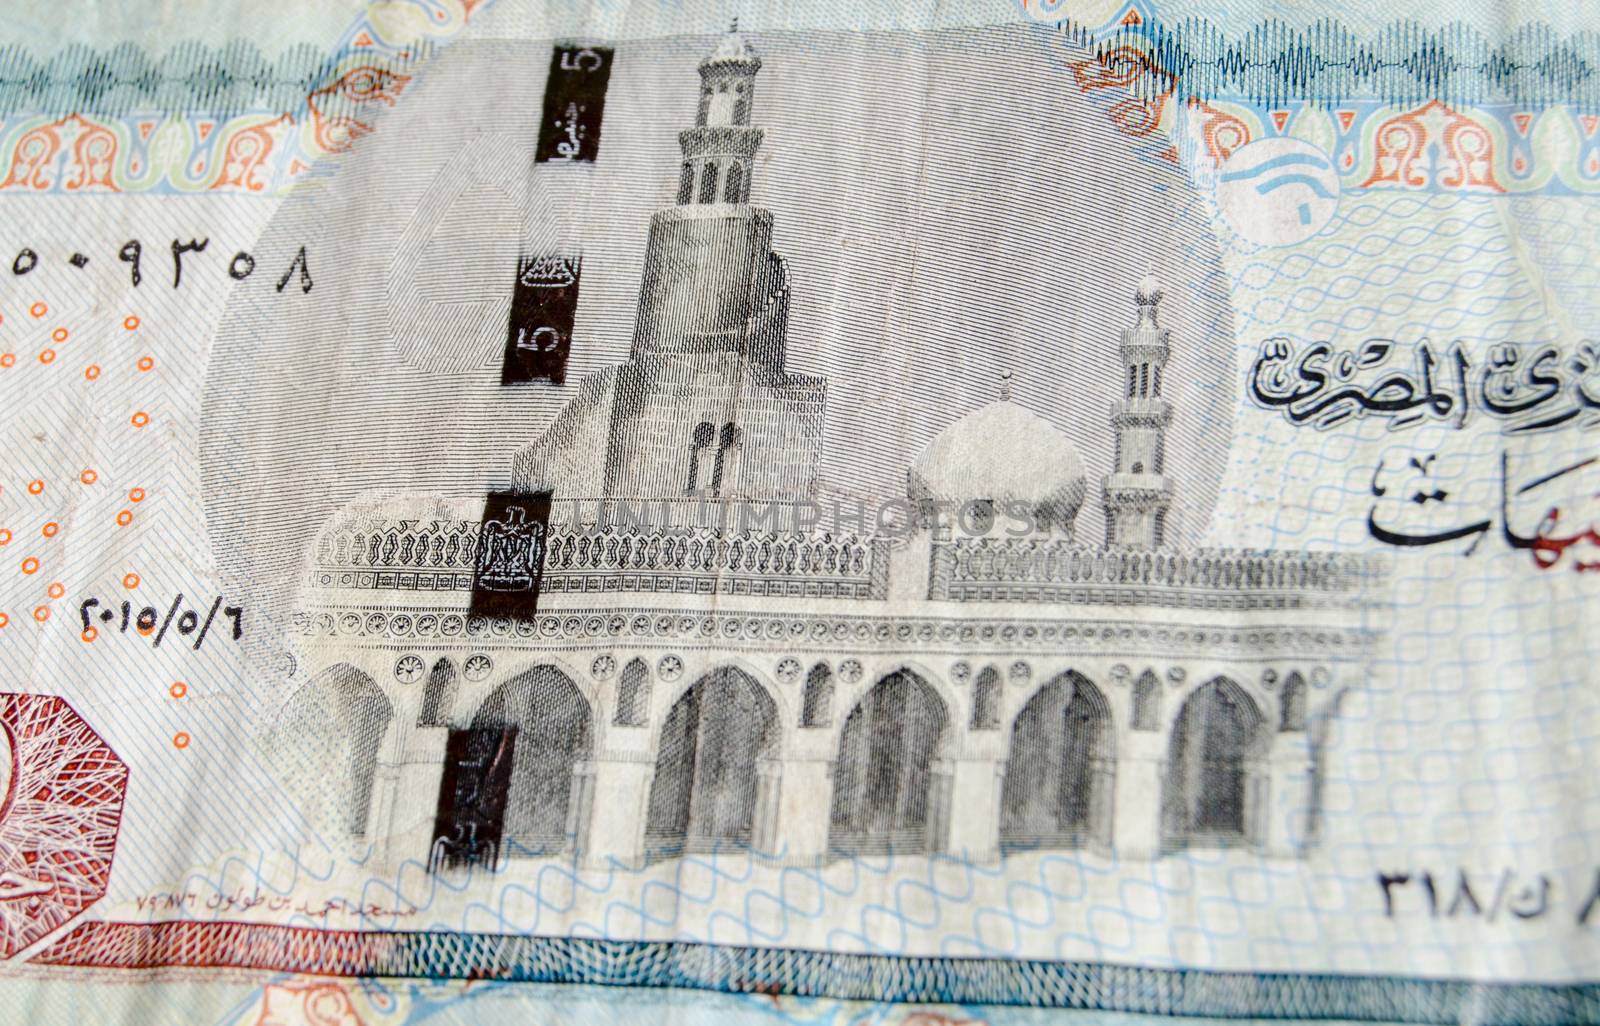 Ibn Tulun Mosque on Egyptian banknote by BasPhoto